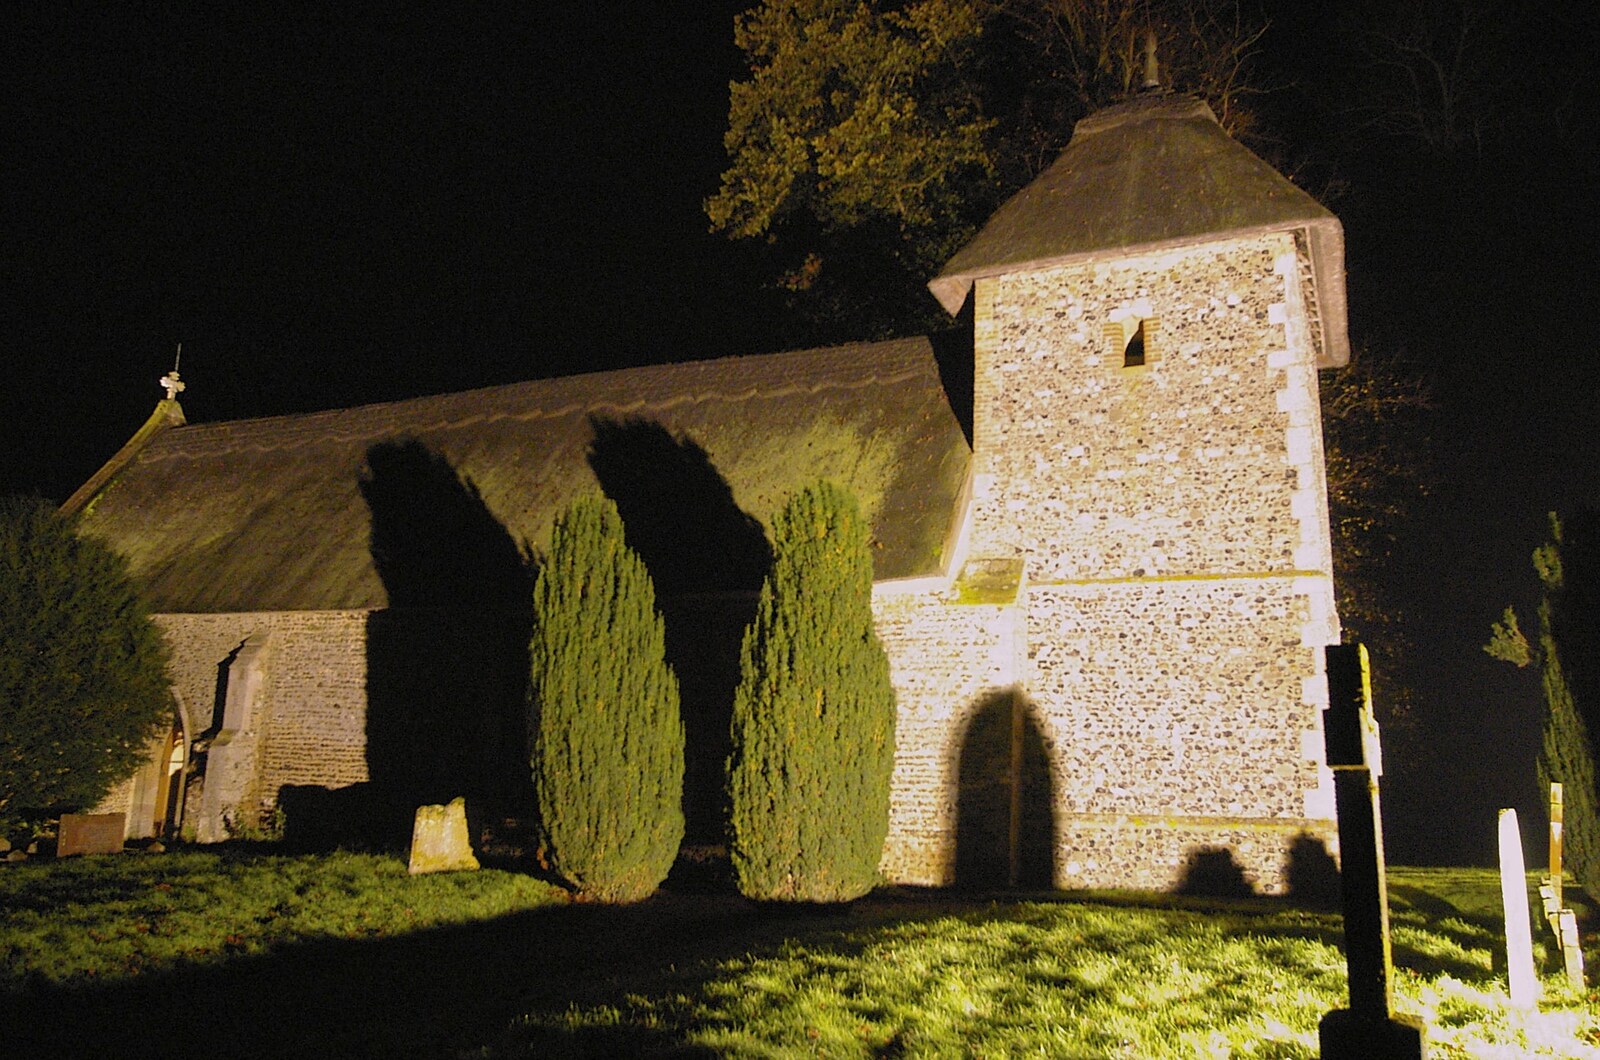 The church at Thornham Parva by night from Thornham Walled Garden, and Bob Last Leaves the Lab, Cambridge - 20th November 2005